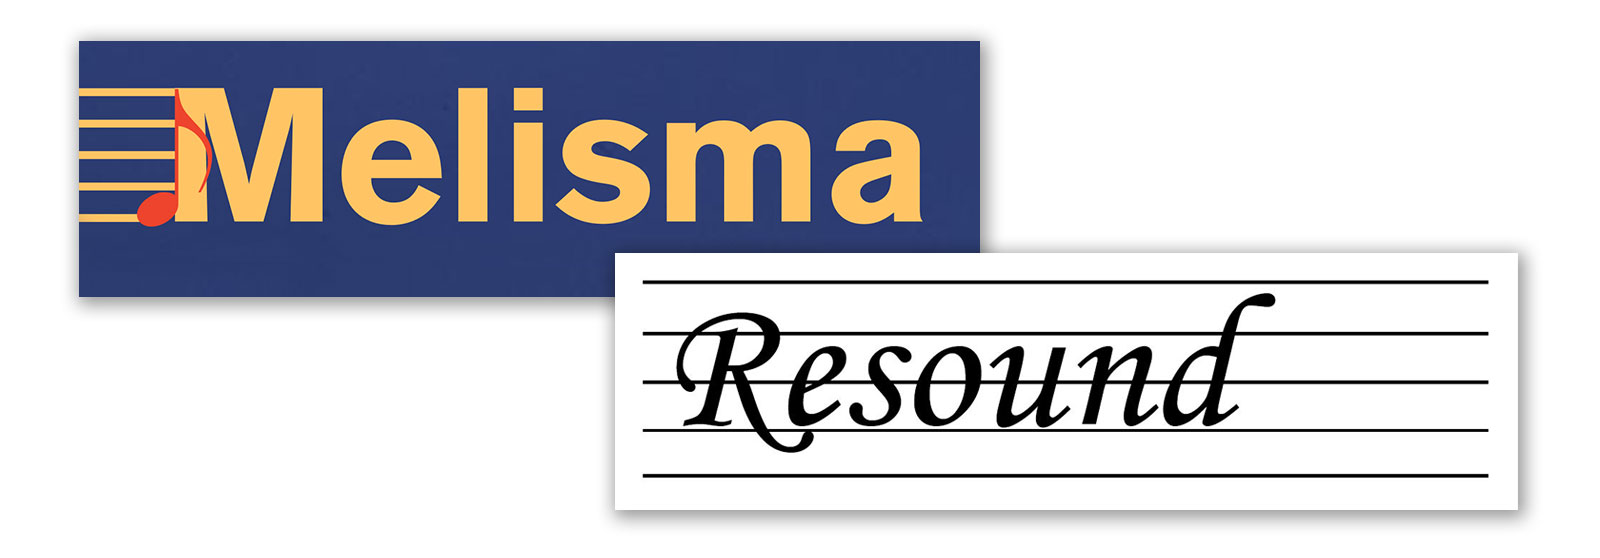 Logos for newsletters Melisma and Resound